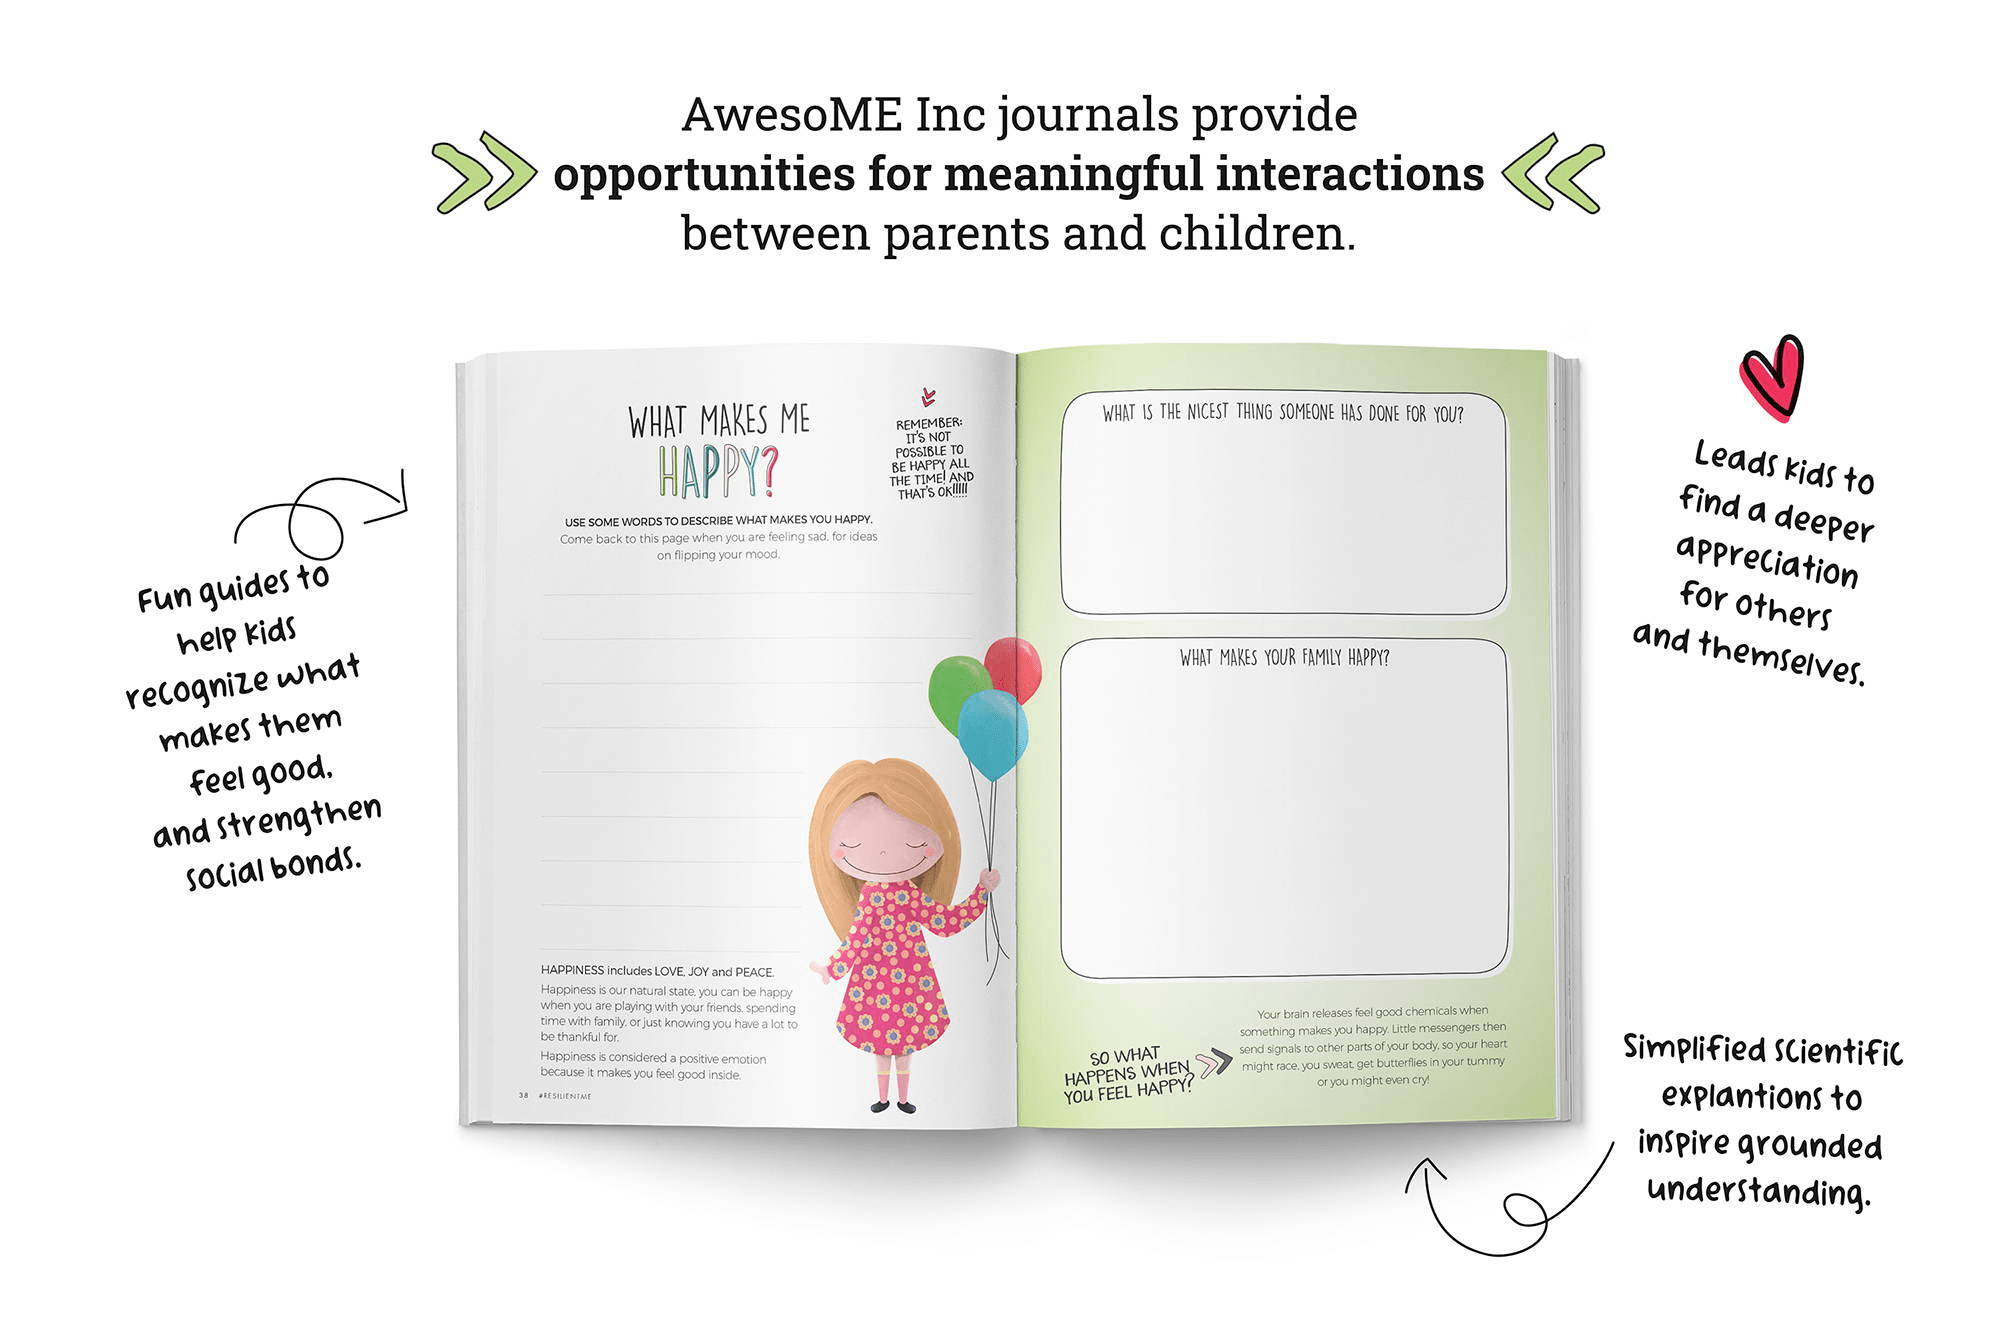 Awesome Inc journals provide opportunities for meaningful interactions between parents and children